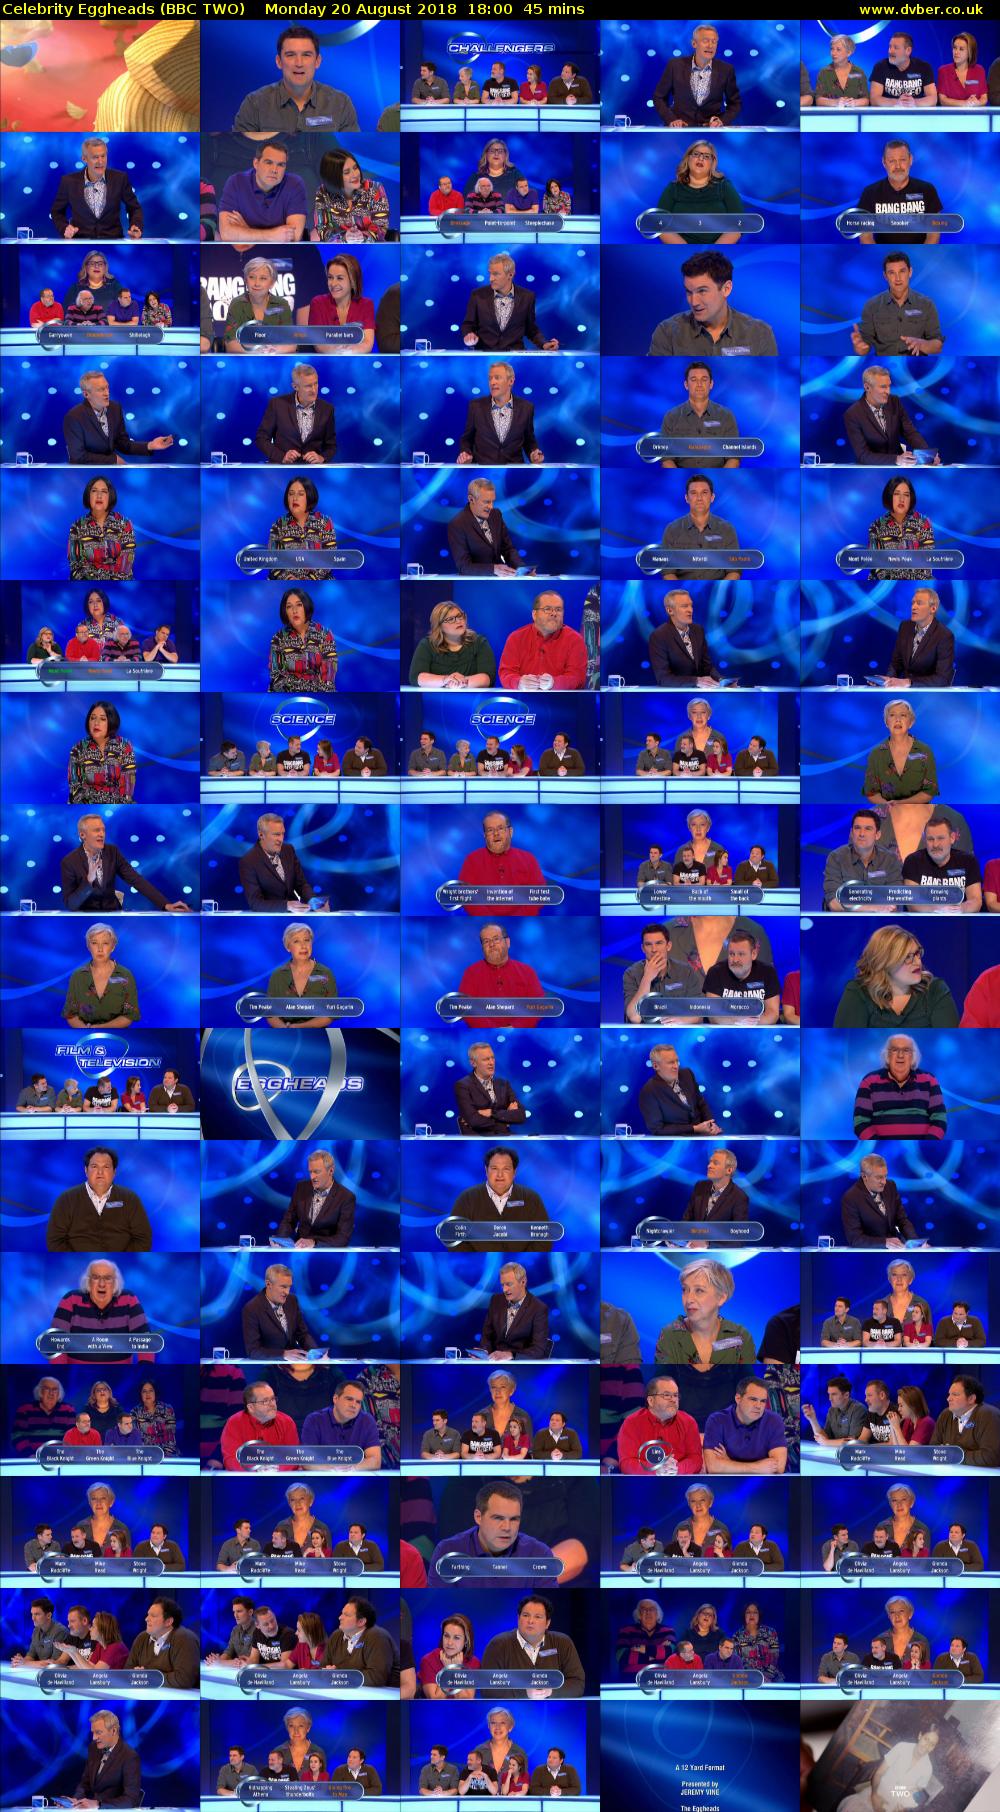 Celebrity Eggheads (BBC TWO) Monday 20 August 2018 18:00 - 18:45